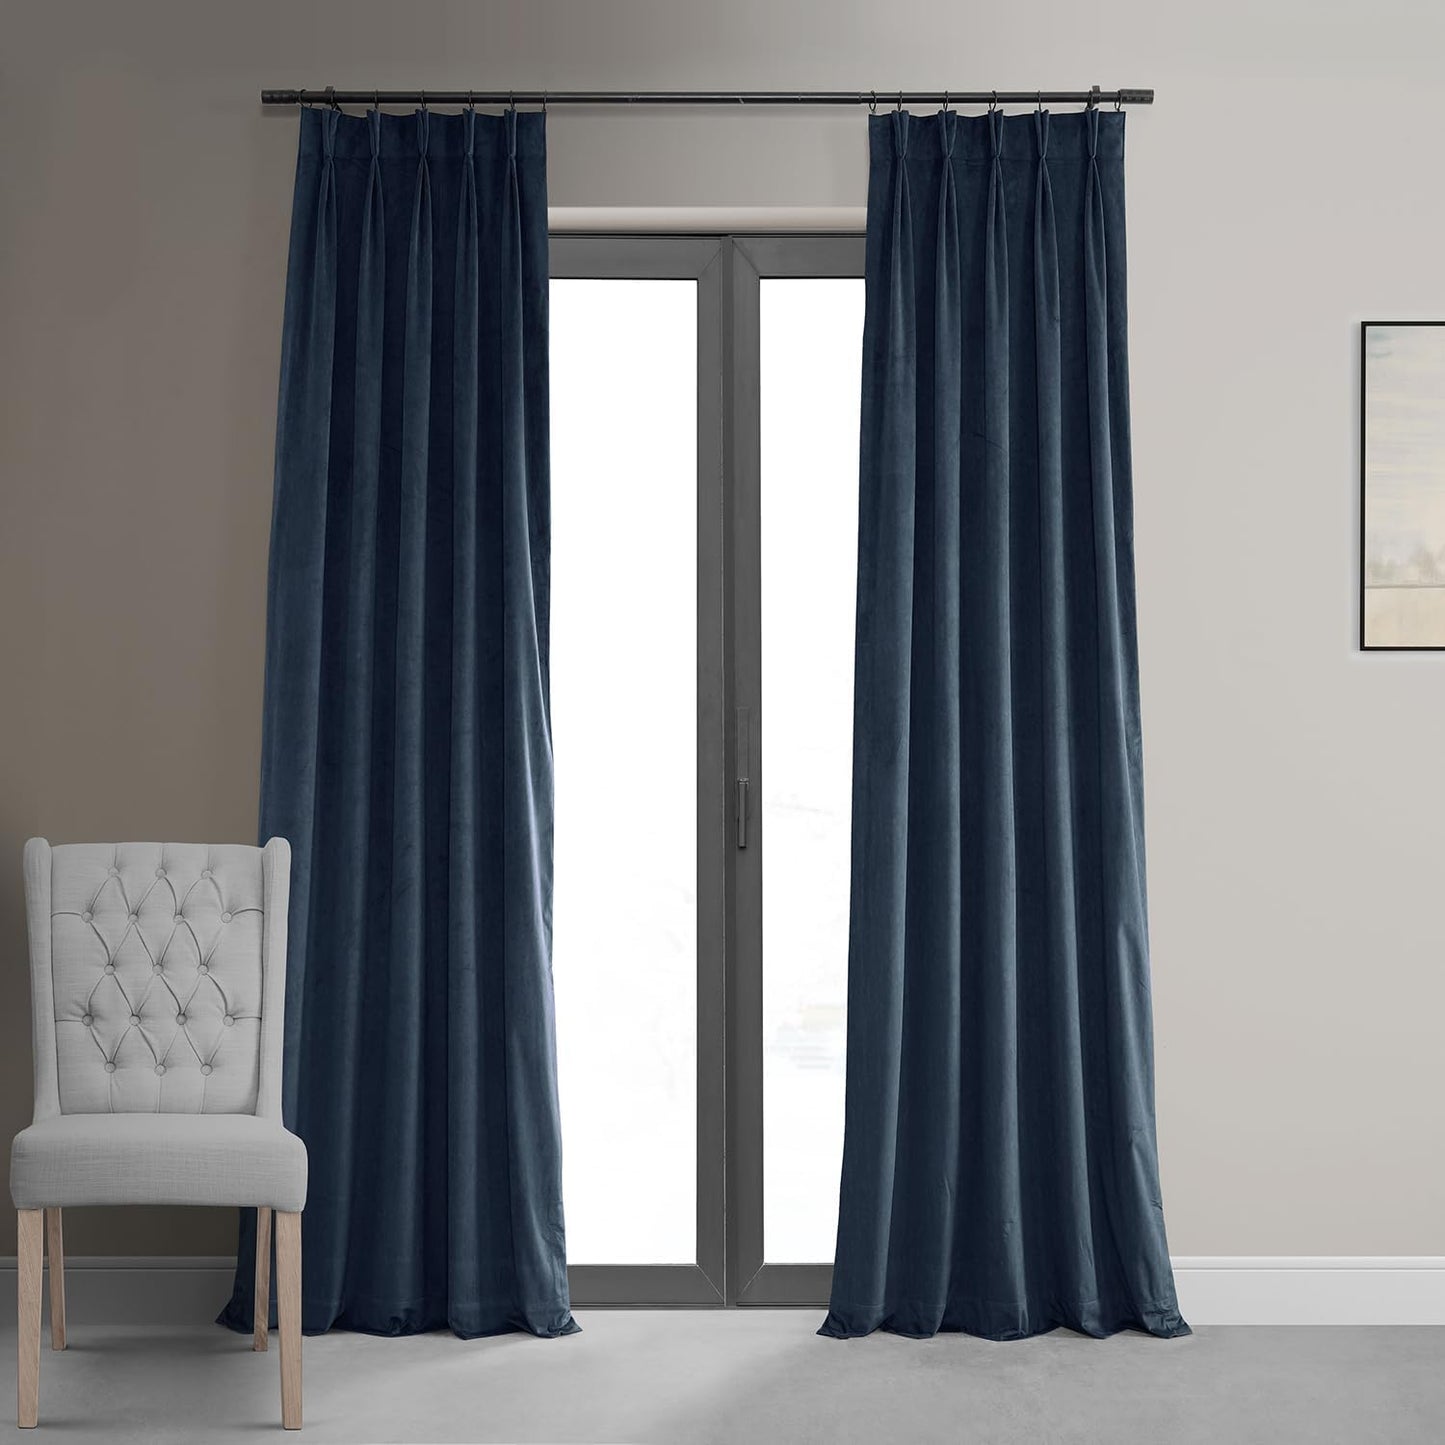 HPD Half Price Drapes Velvet Blackout Curtains/Drapes - 96 Inches Long 1 Panel Blackout Curtain Signature Pleated for Living Room & Bedroom - 25W X 96L, Porcelain White  Exclusive Fabrics & Furnishings Midnight Blue 25W X 108L 